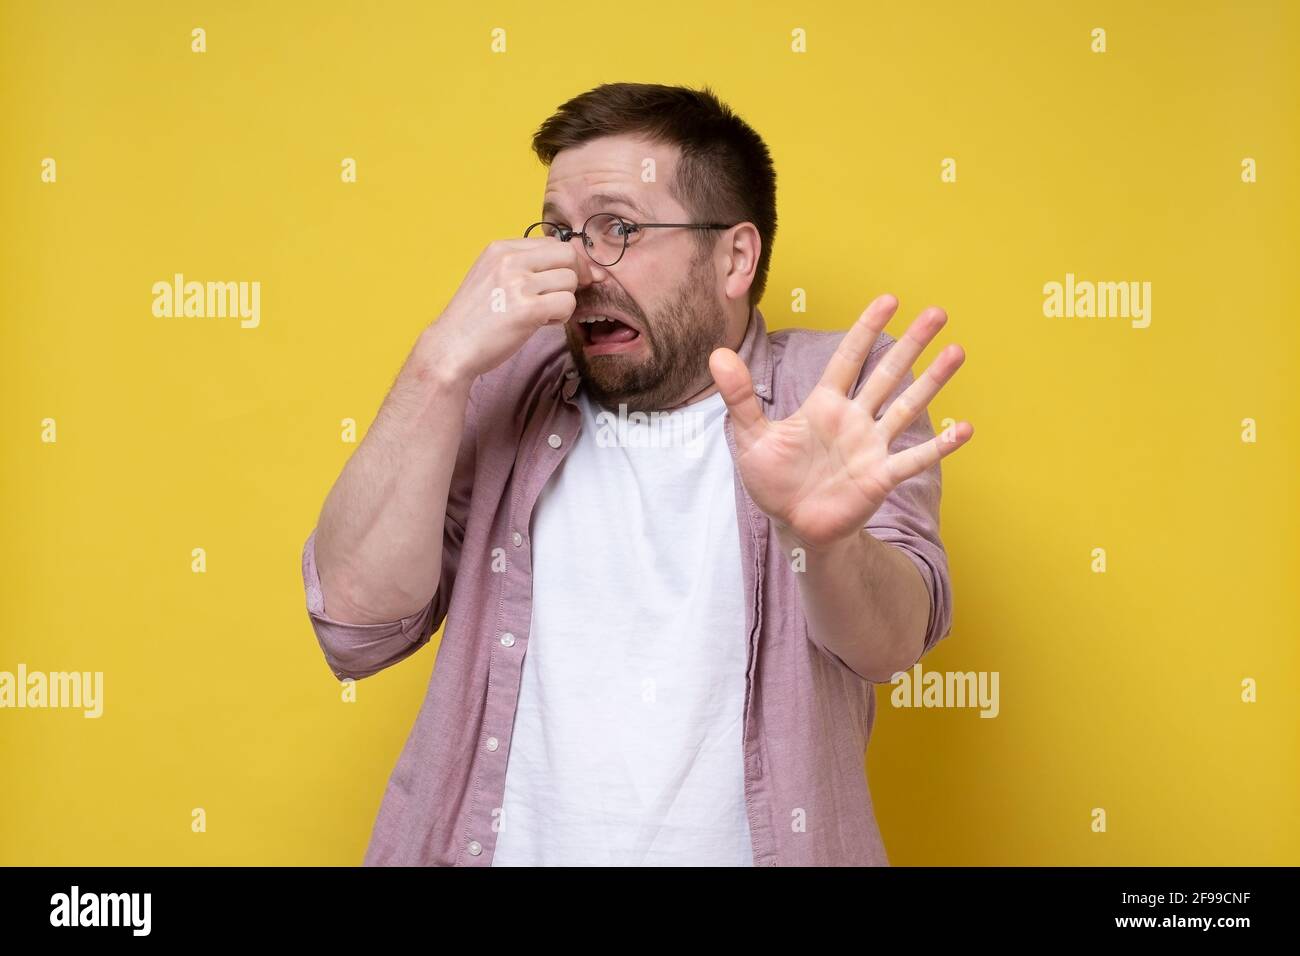 Young man in glasses squeezes nose with fingers because of an unpleasant smell, makes a stop gesture and looks frightened.  Stock Photo